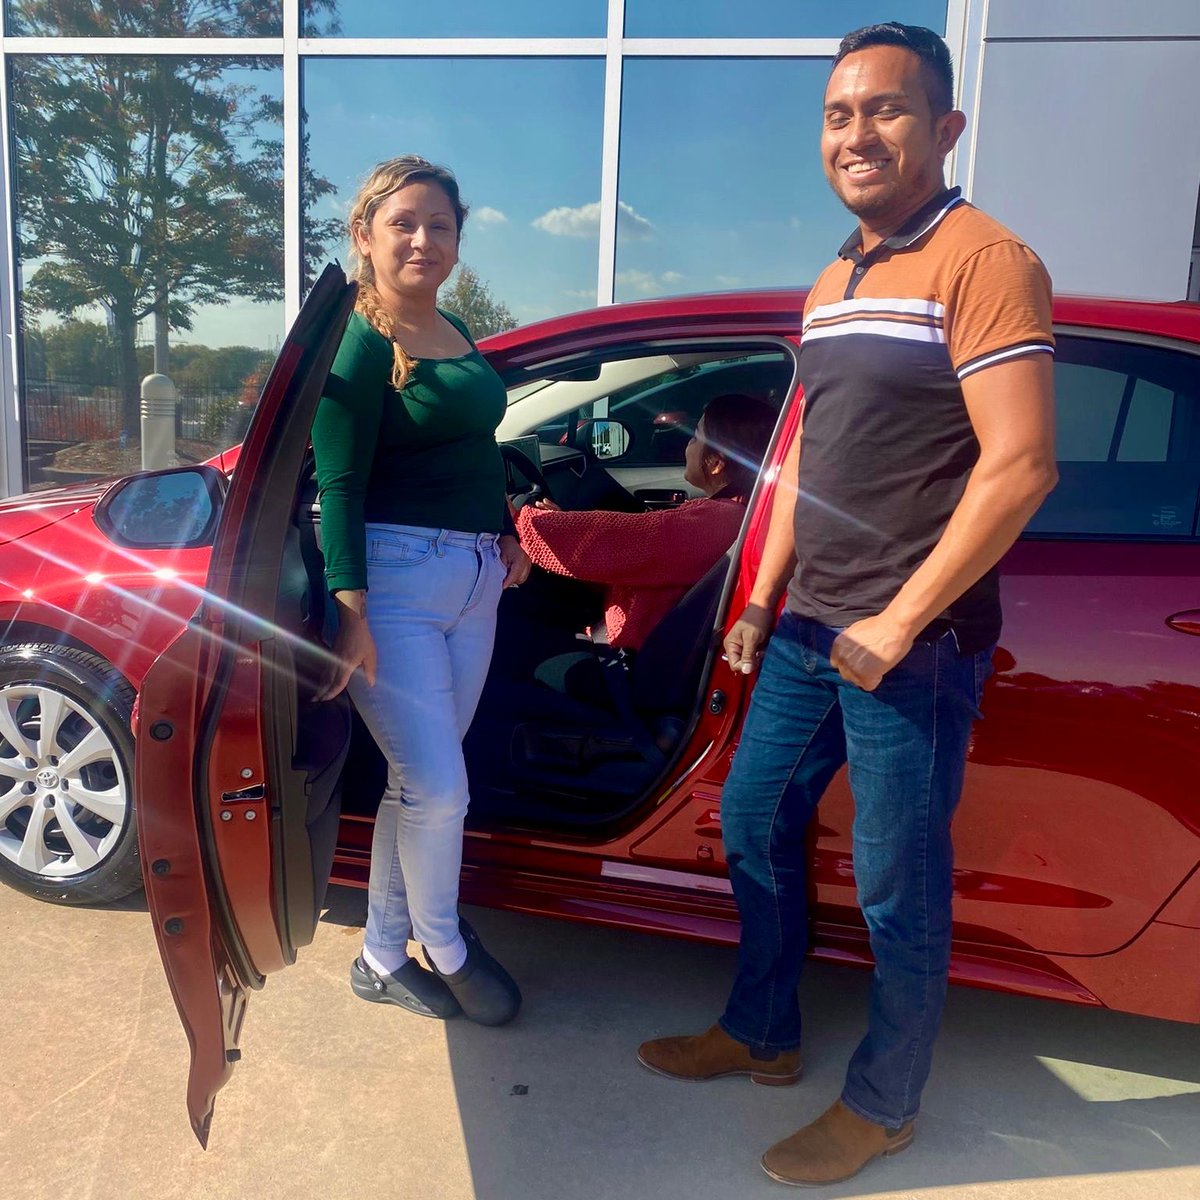 🌟 Ms. Shyrley is rolling into the future with her New 2024 Toyota Corolla! 🚗💨

She's got that new car excitement in the air. Time to hit the road in style, Shyrley! 🛣️

Explore our inventory ➡️ [Link](bit.ly/3BW6Cry) #NewCarAdventure #DreamsInDriveways 🌟